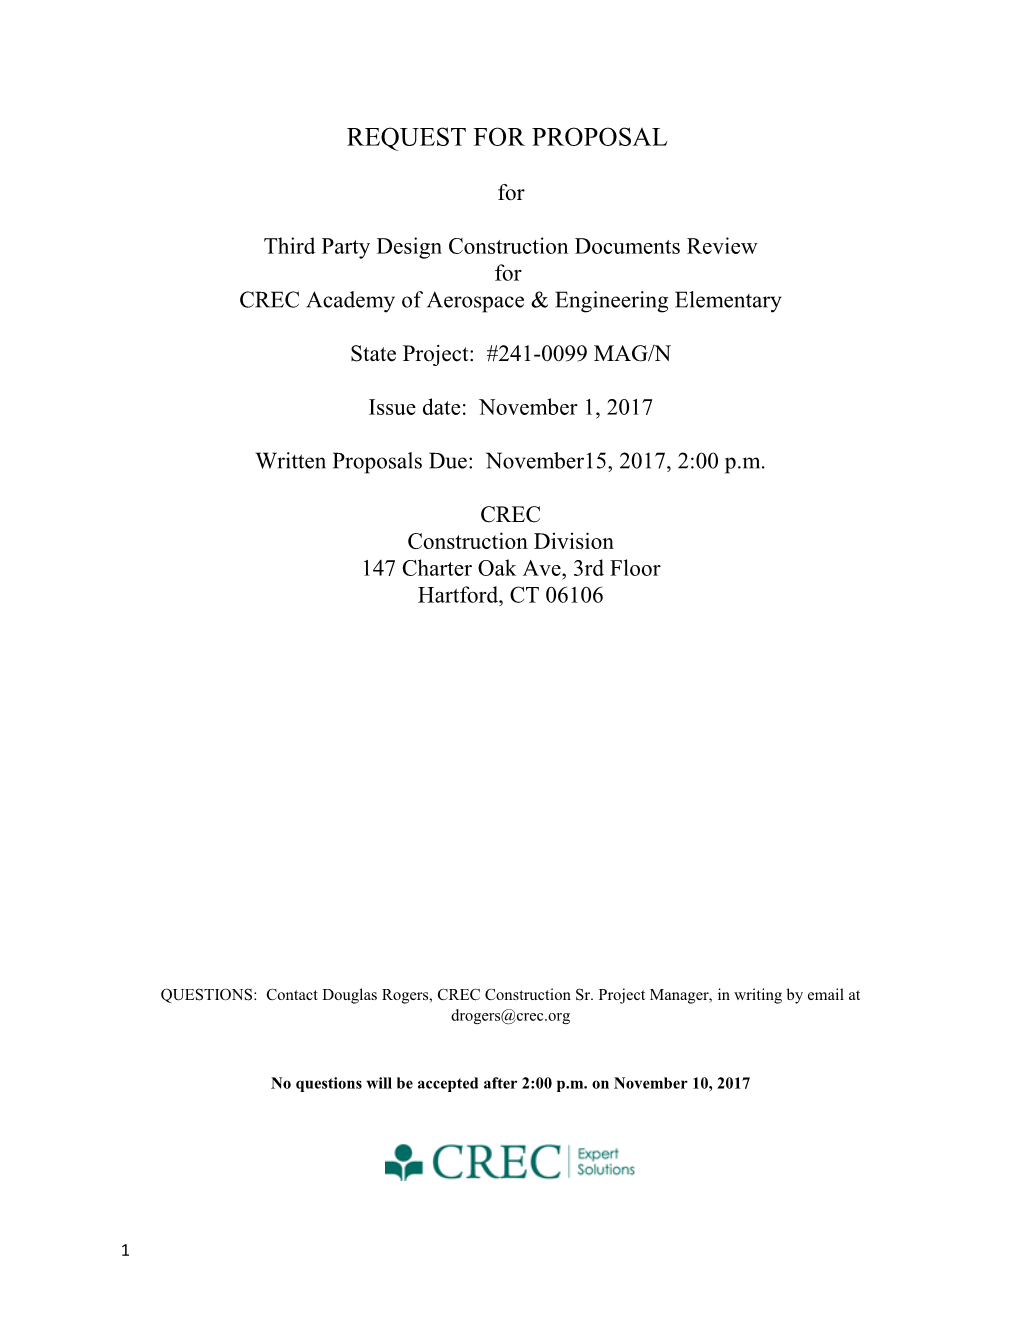 Third Party Design Construction Documents Review